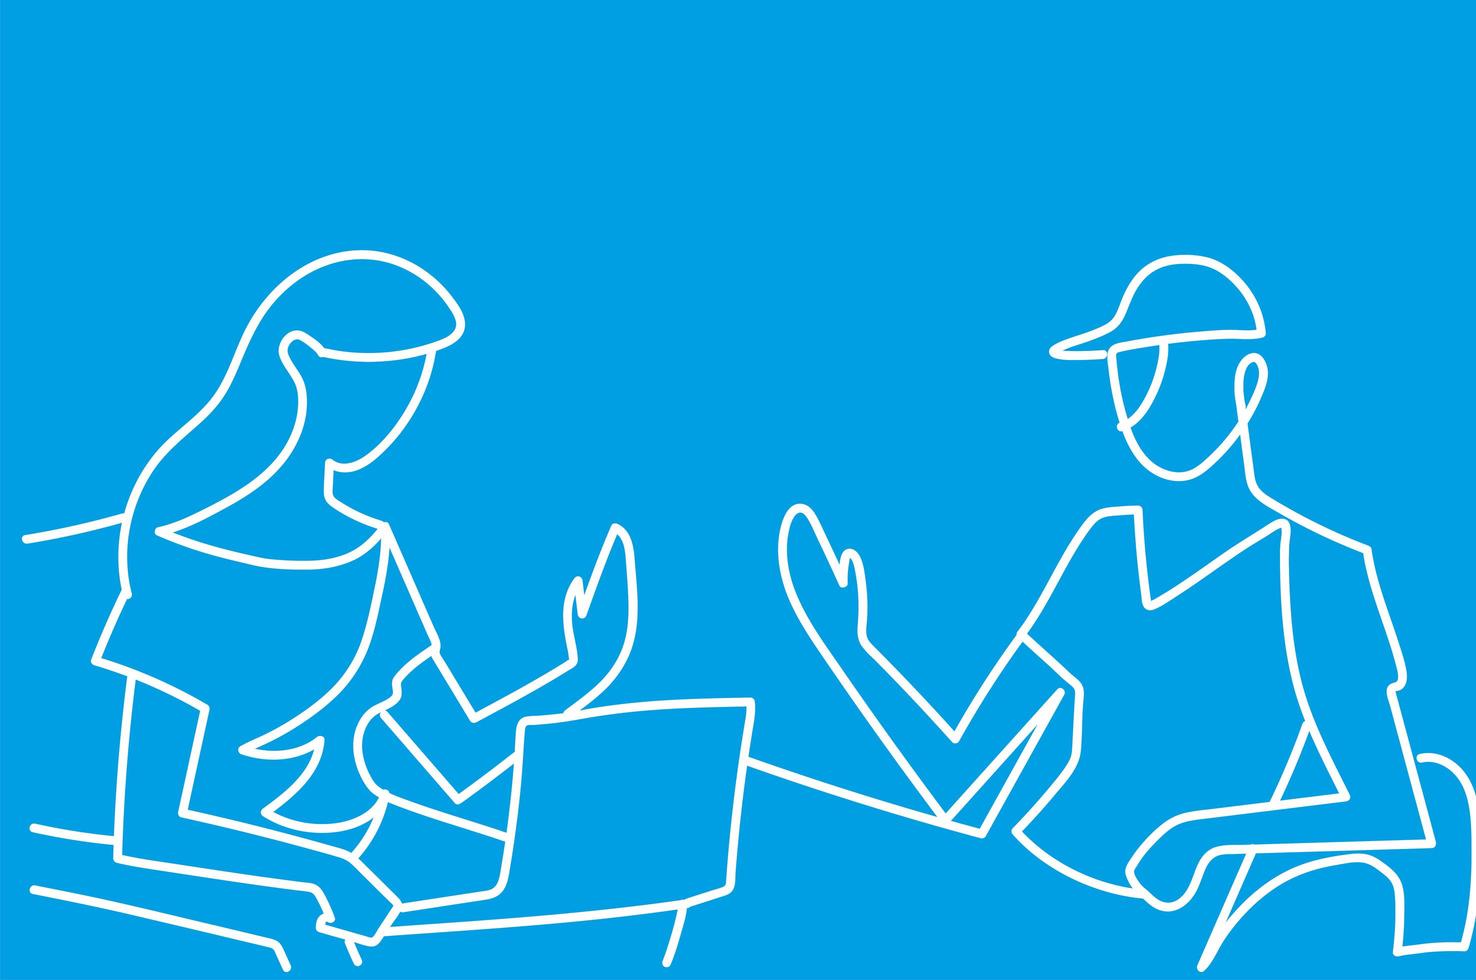 woman with laptop and man with sport cap together blue background continuous line style vector